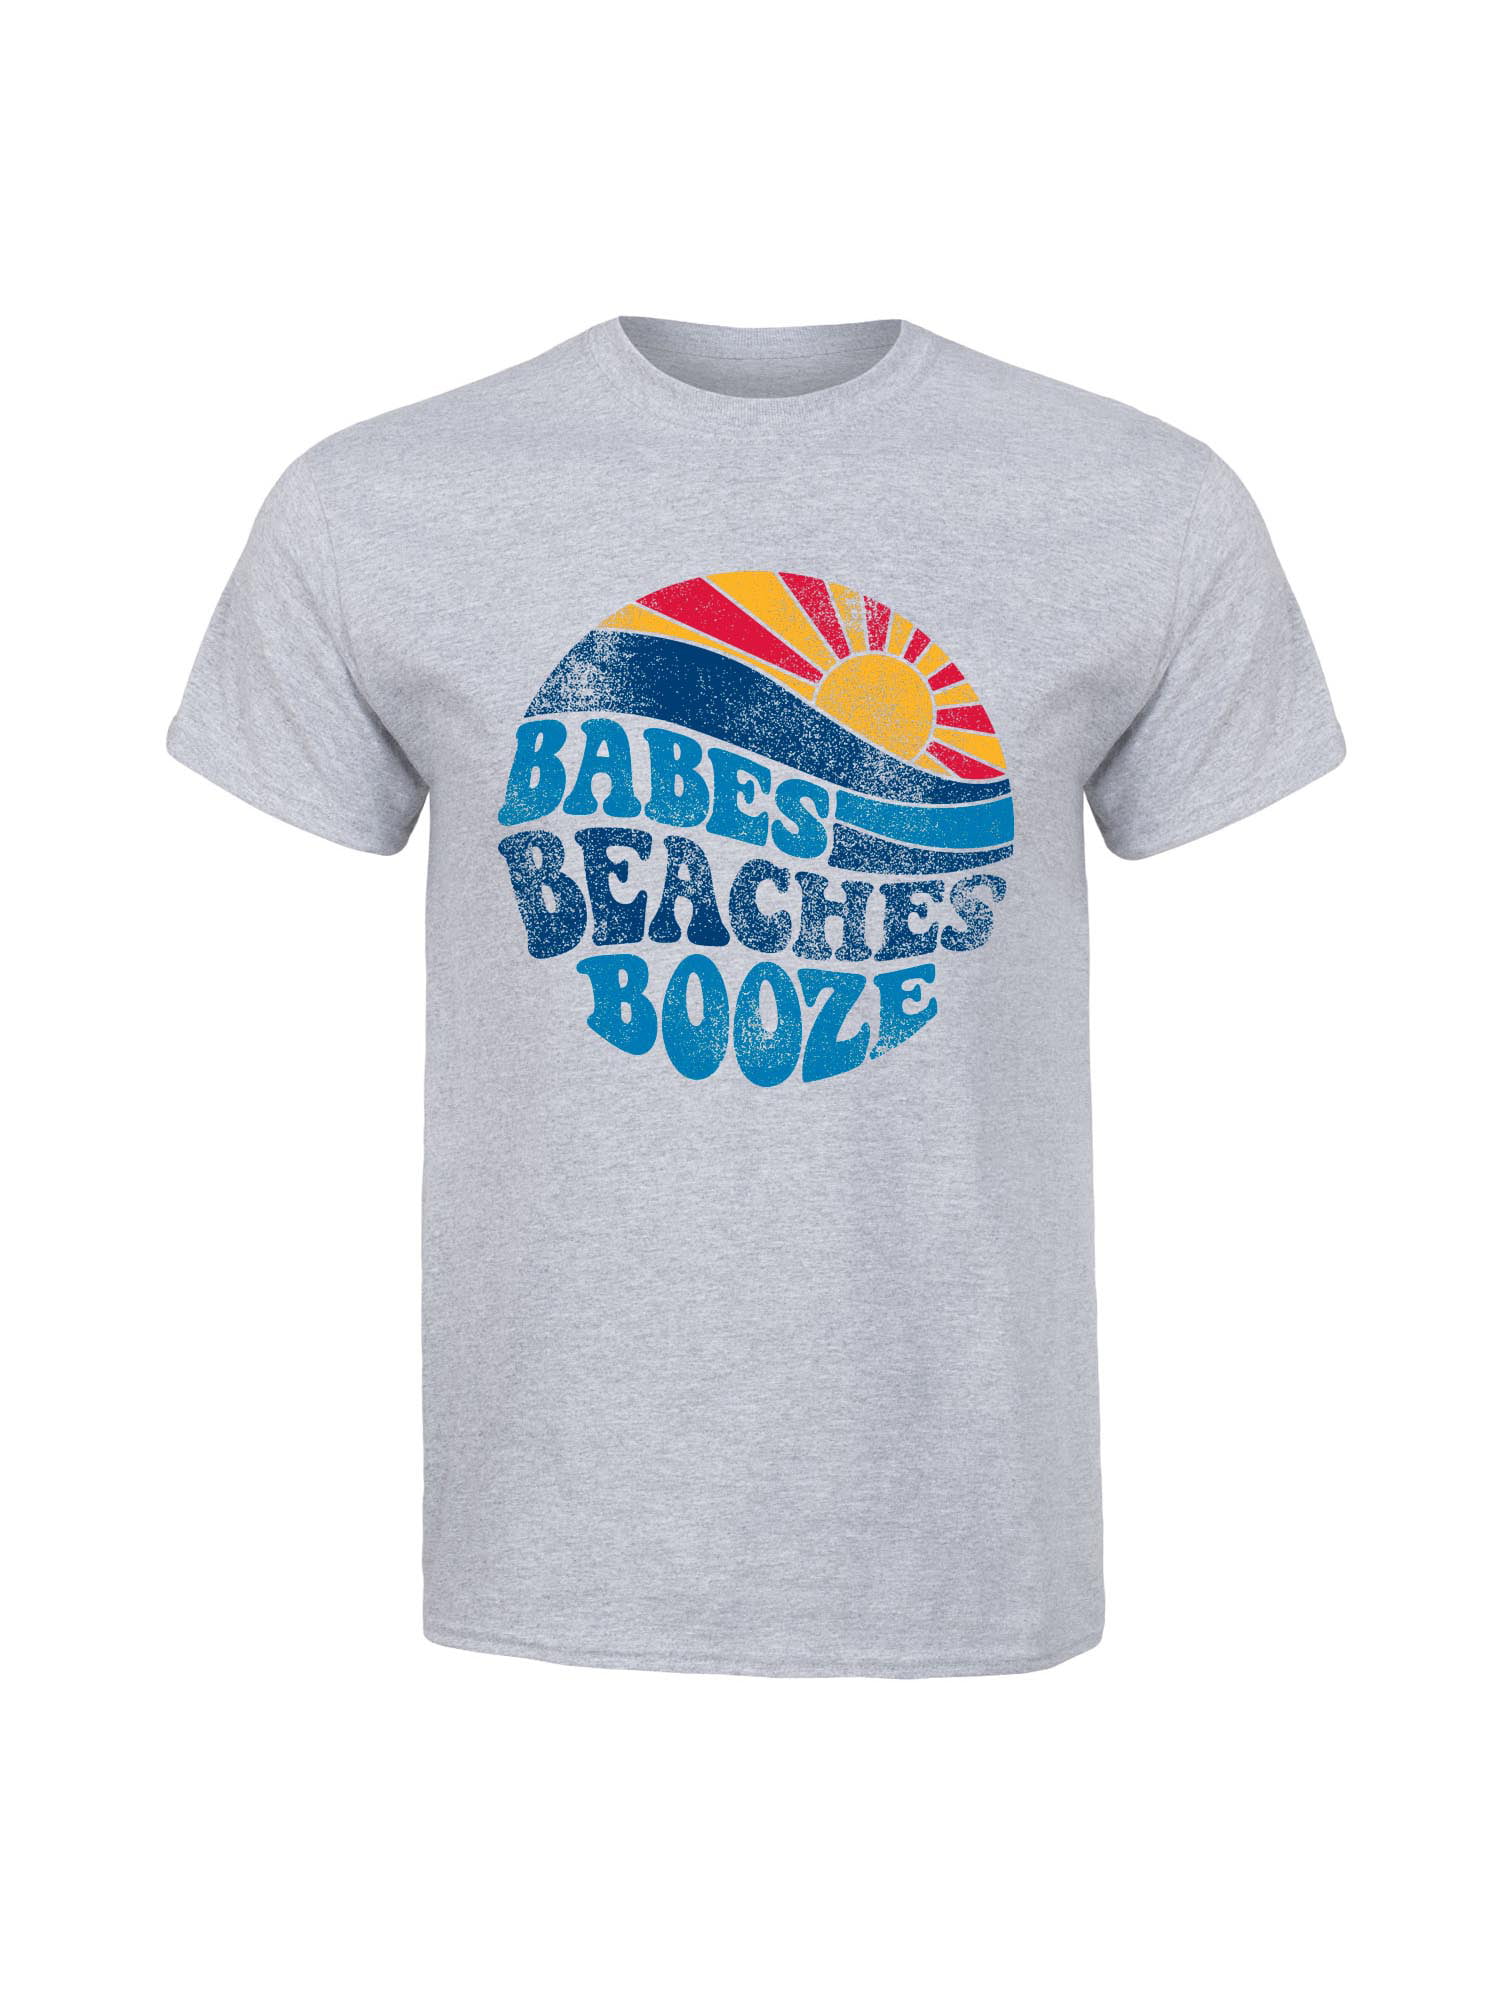 Instant Message - Babes Beaches Booze - Men's Short Sleeve Graphic T ...